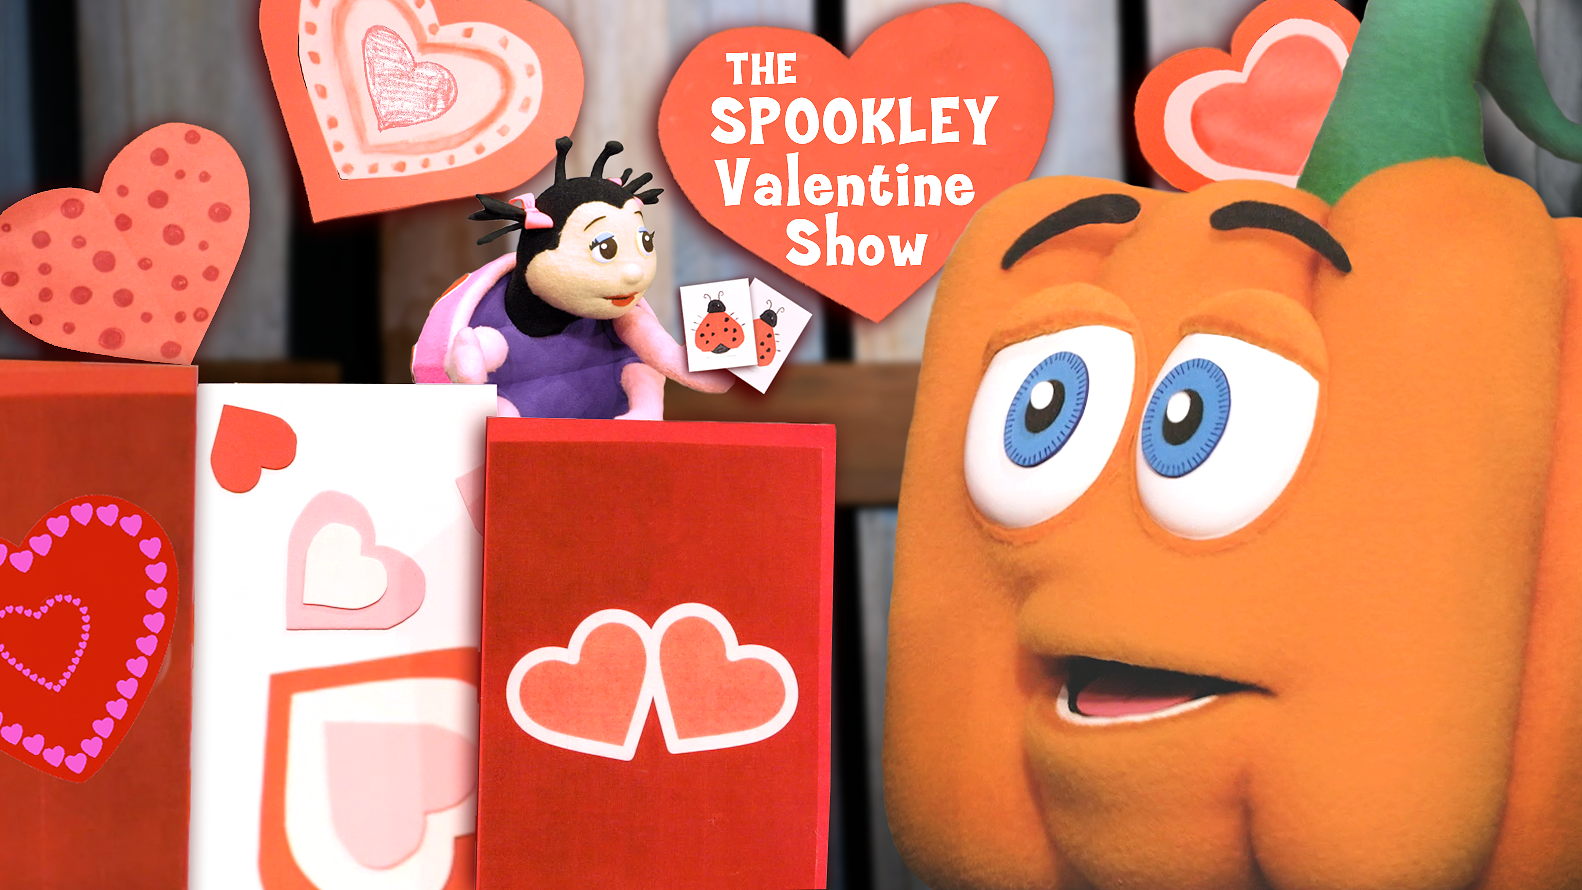 Screencap from The Spookley Valentine Show